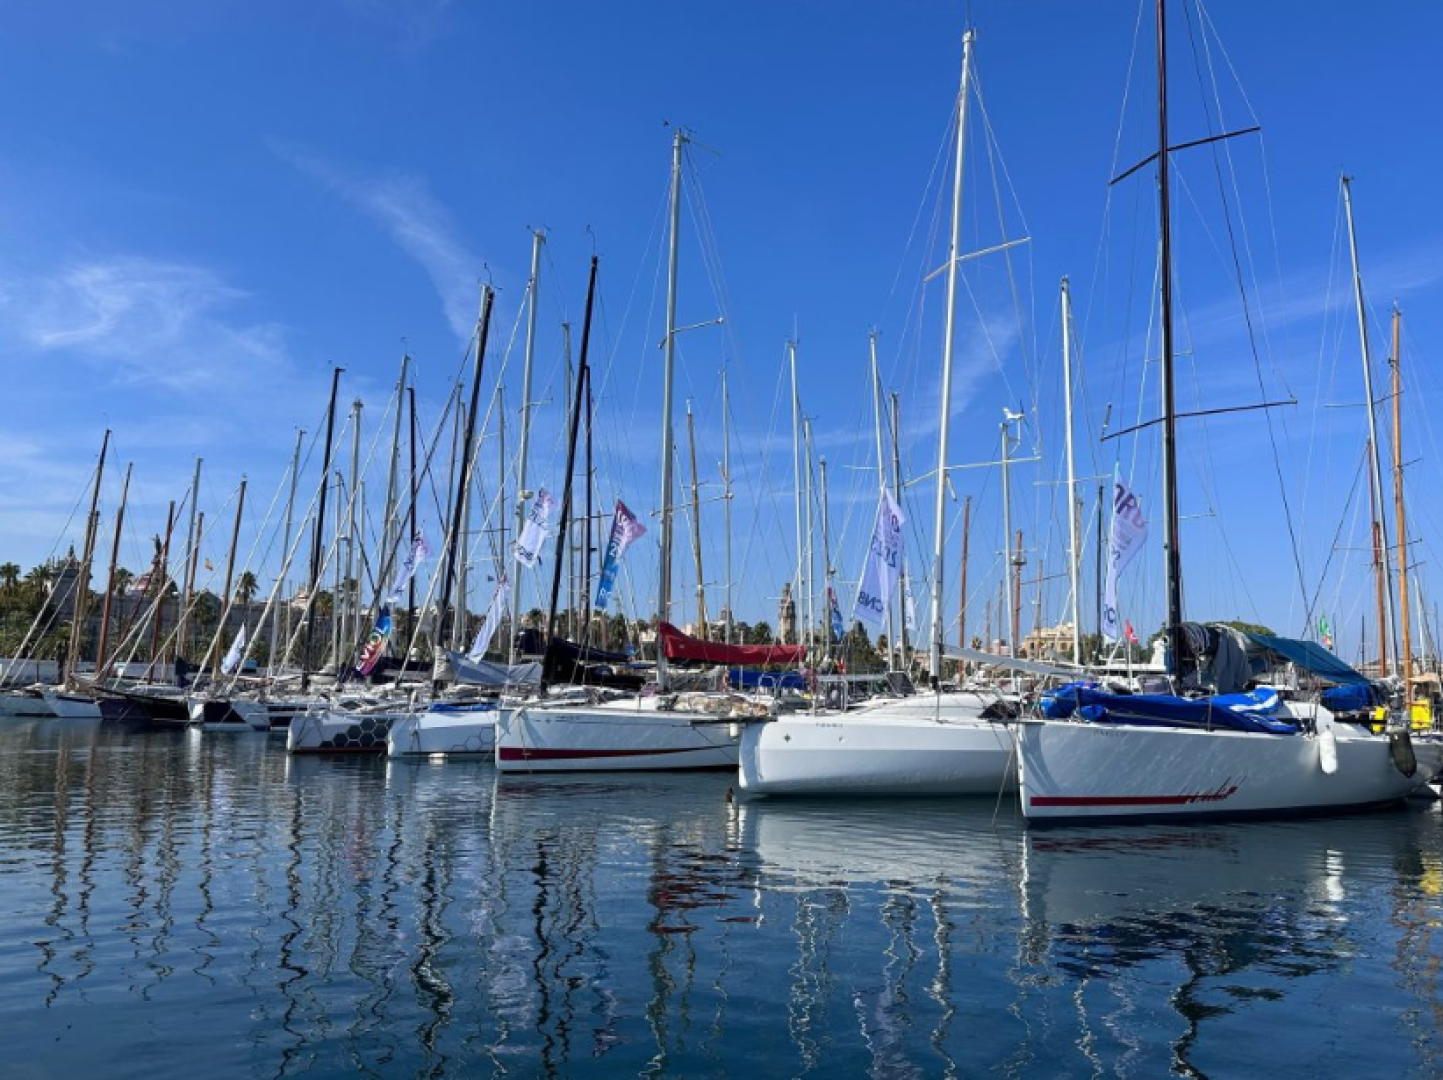 2023 ORC Double Handed Worlds starts tomorrow in Barcelona